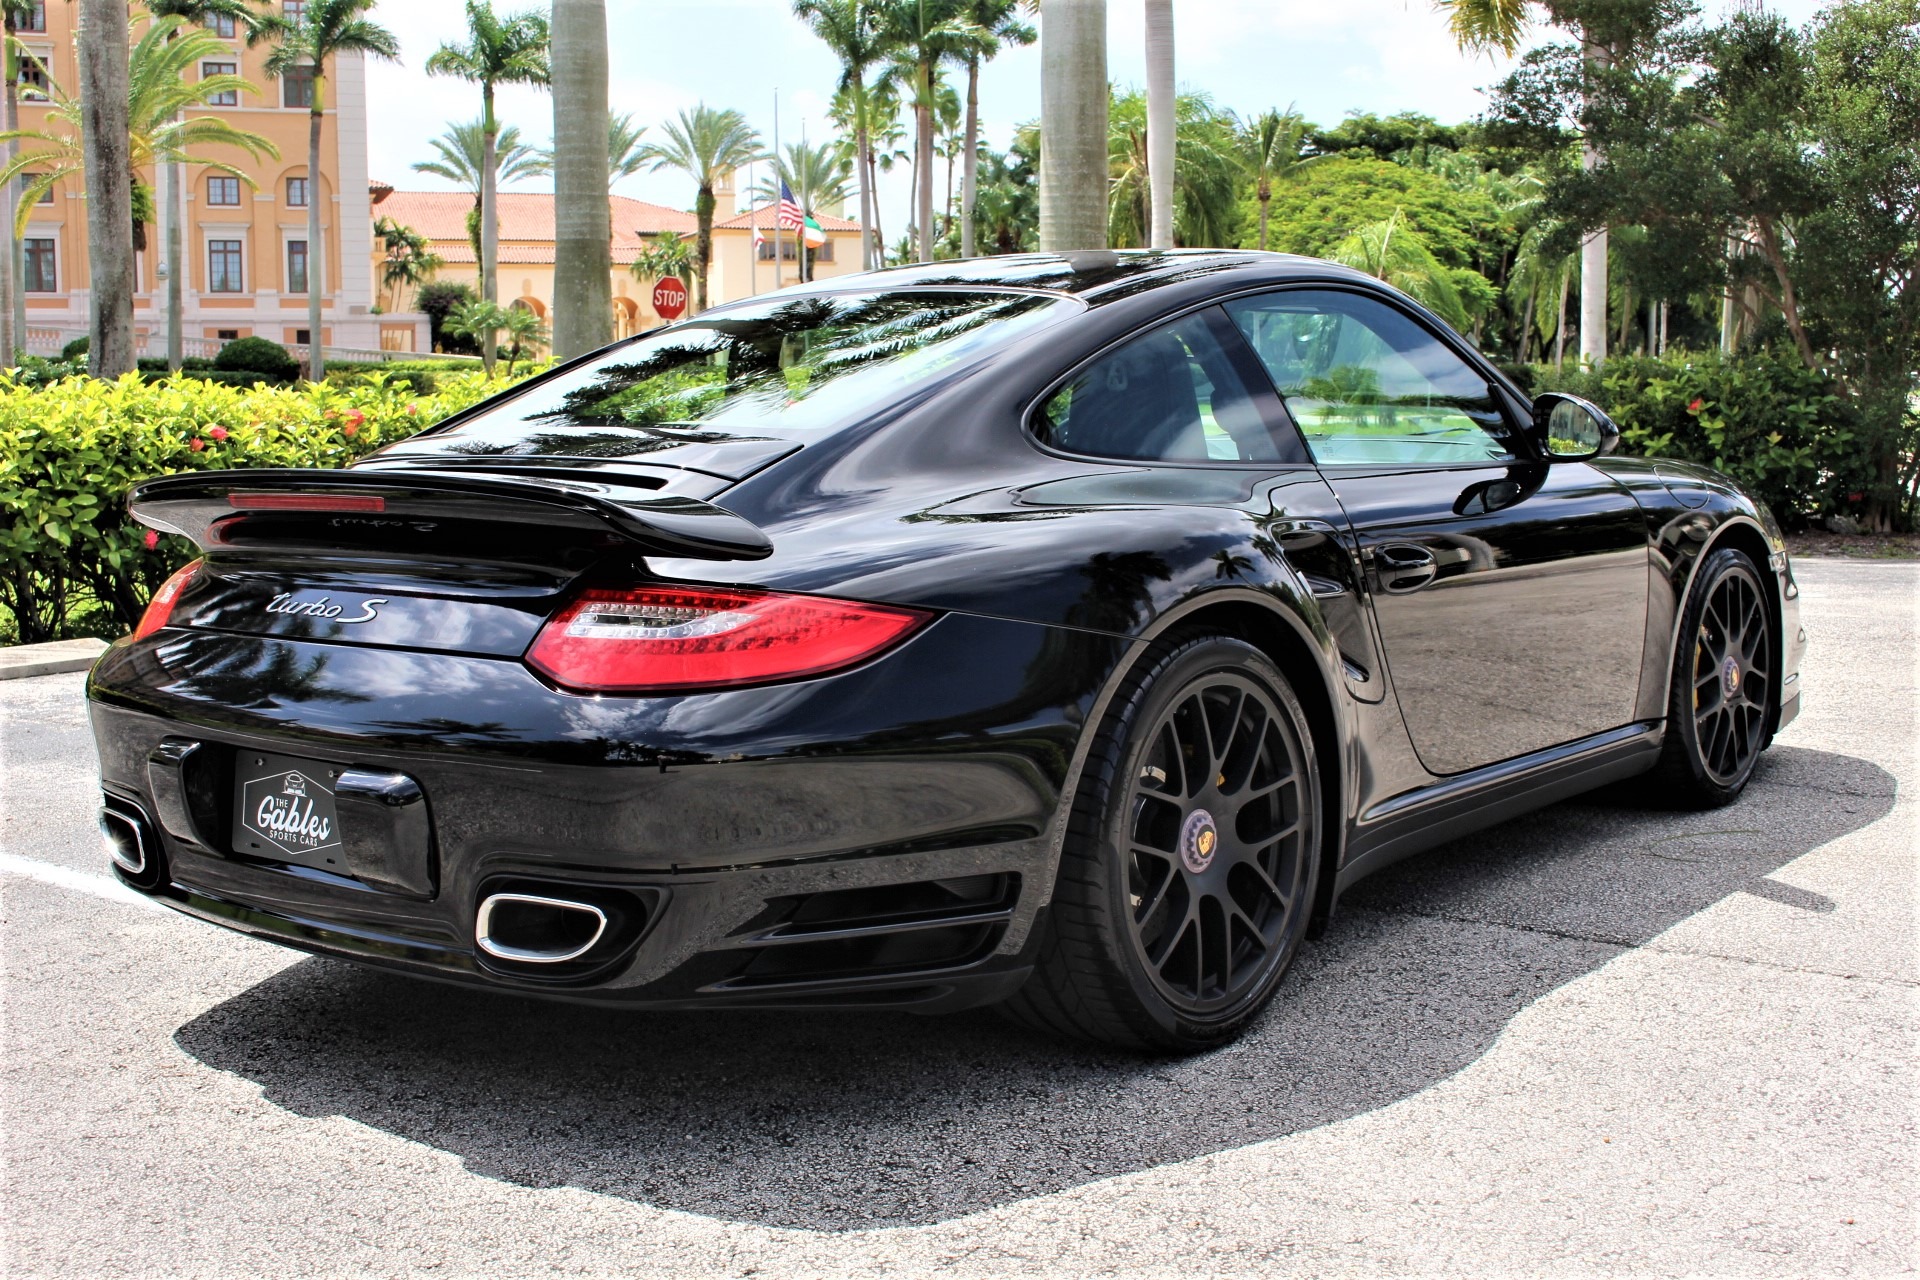 Used 2011 Porsche 911 Turbo S for sale Sold at The Gables Sports Cars in Miami FL 33146 4